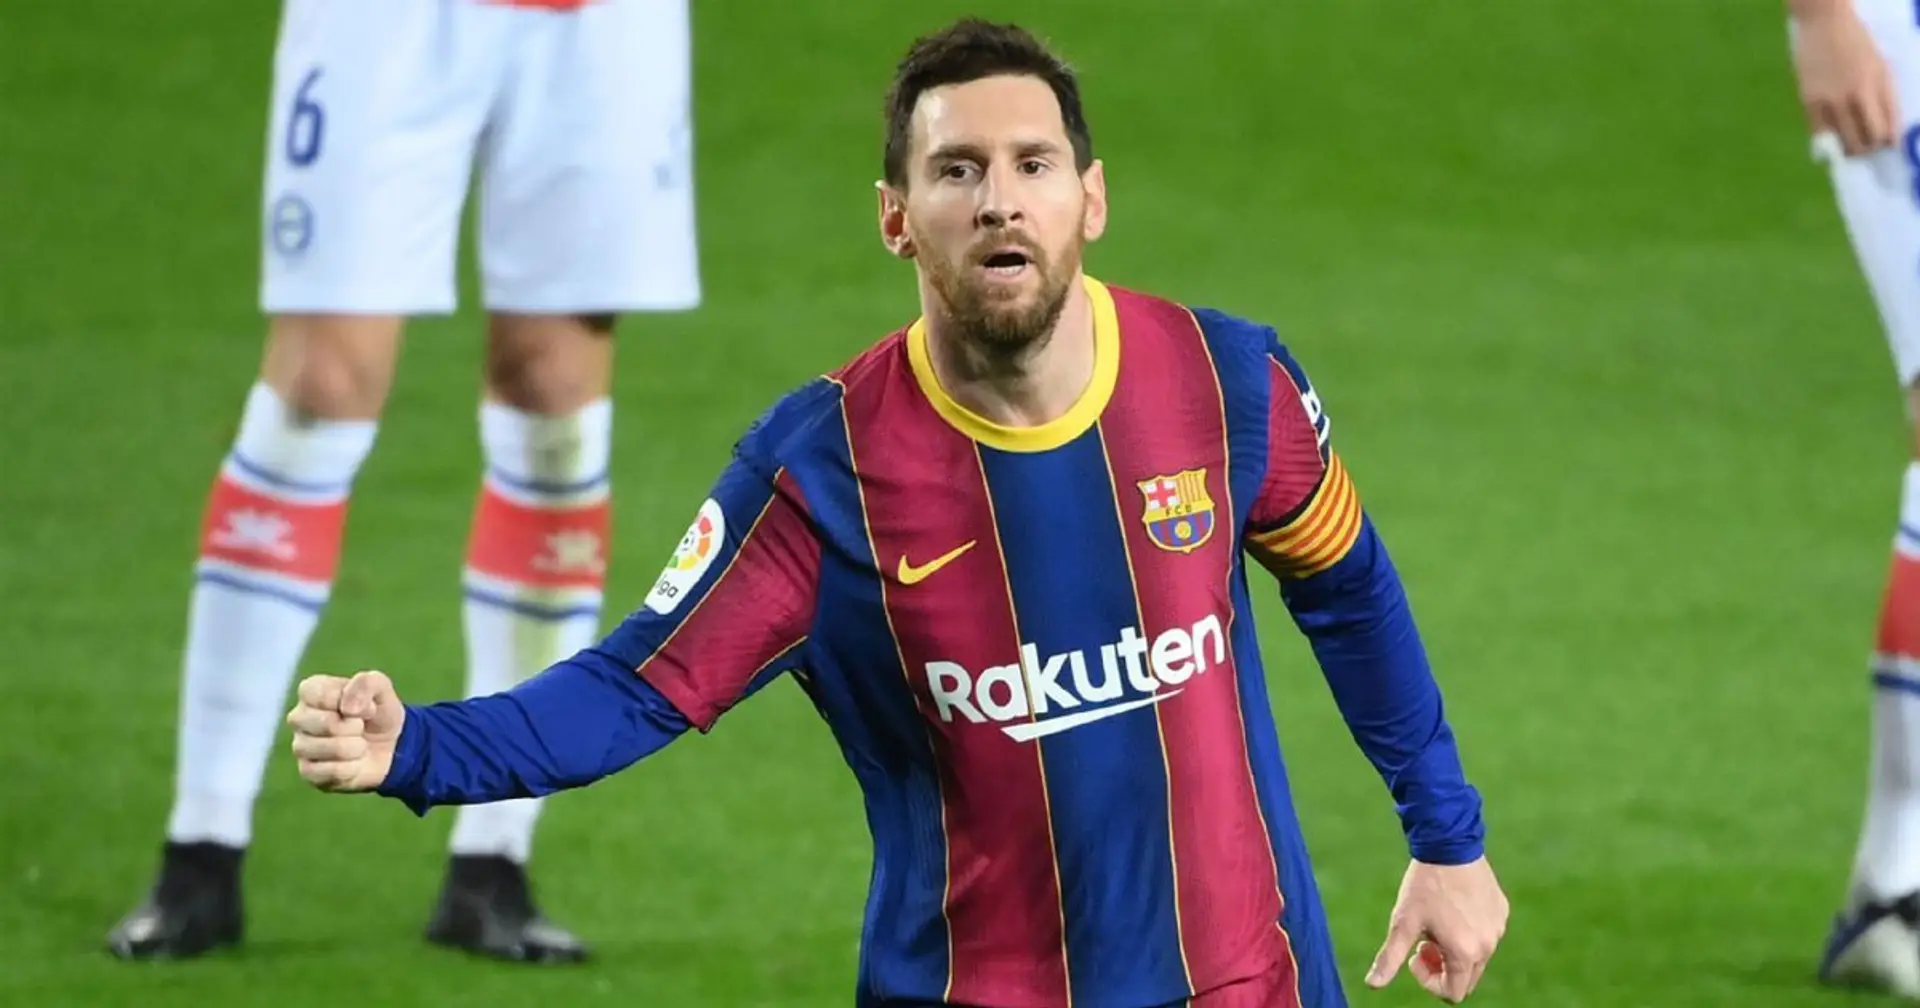 Messi achieves impressive feat after rapid-fire goal and assist vs Alaves